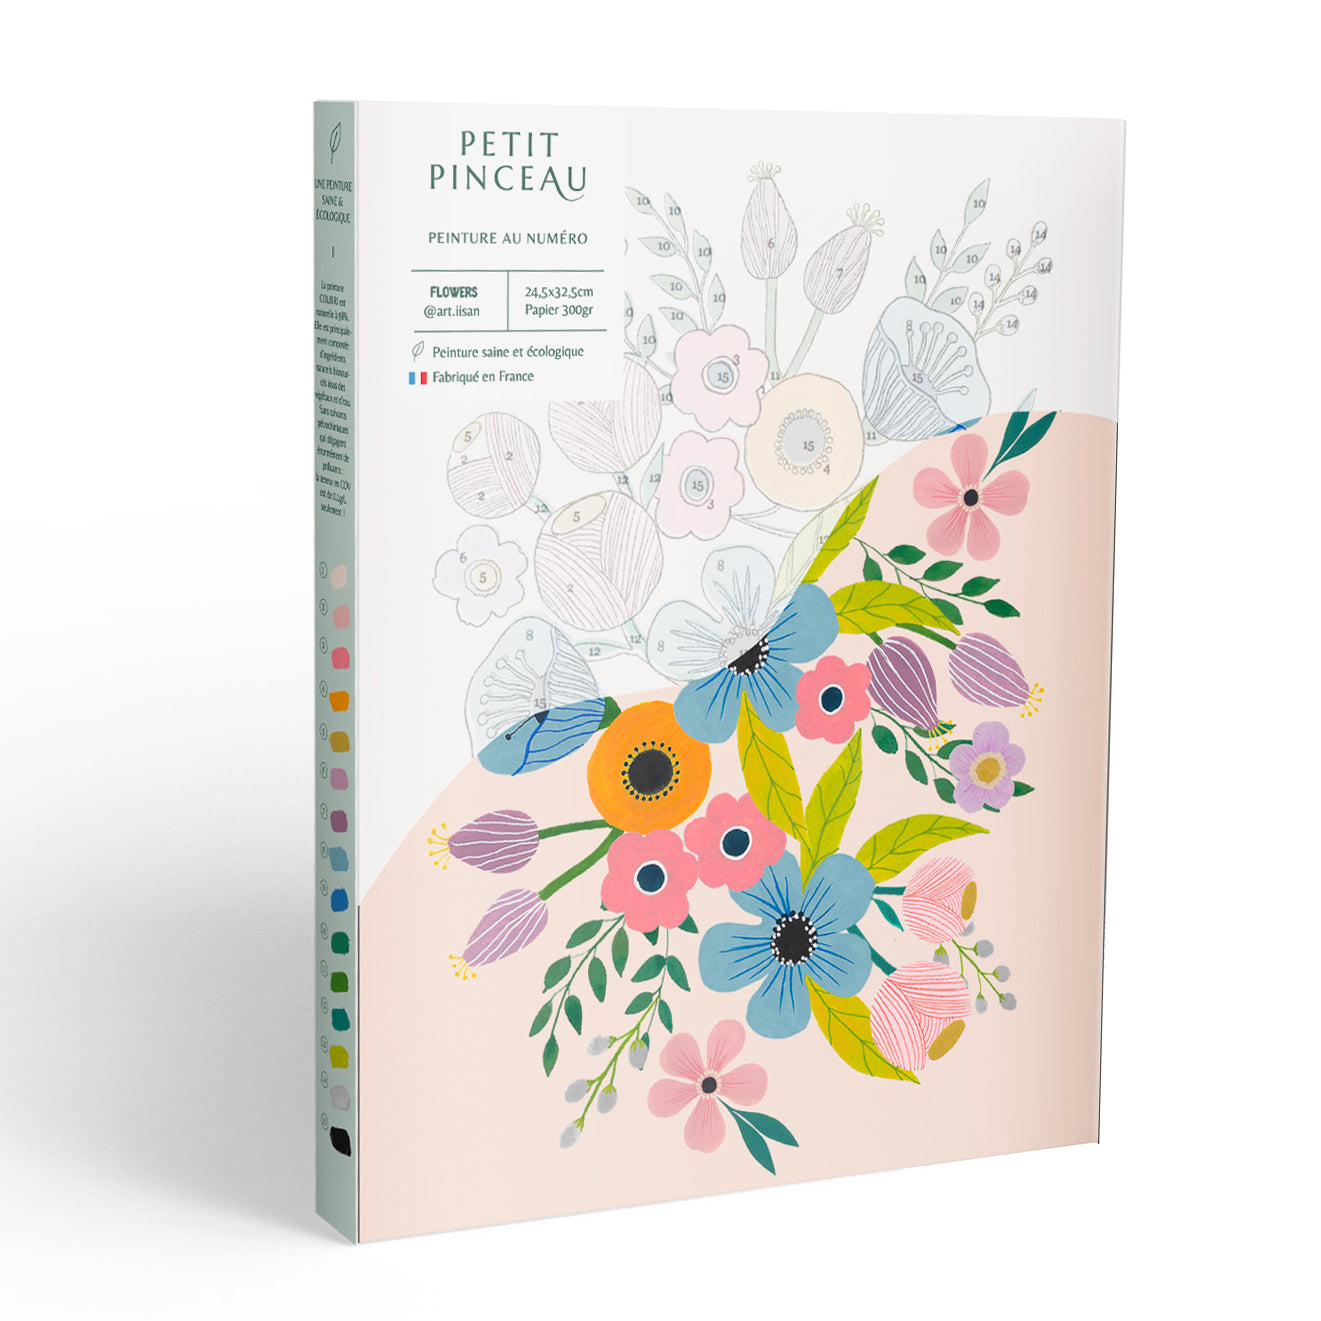 Paint by number kit - Flowers